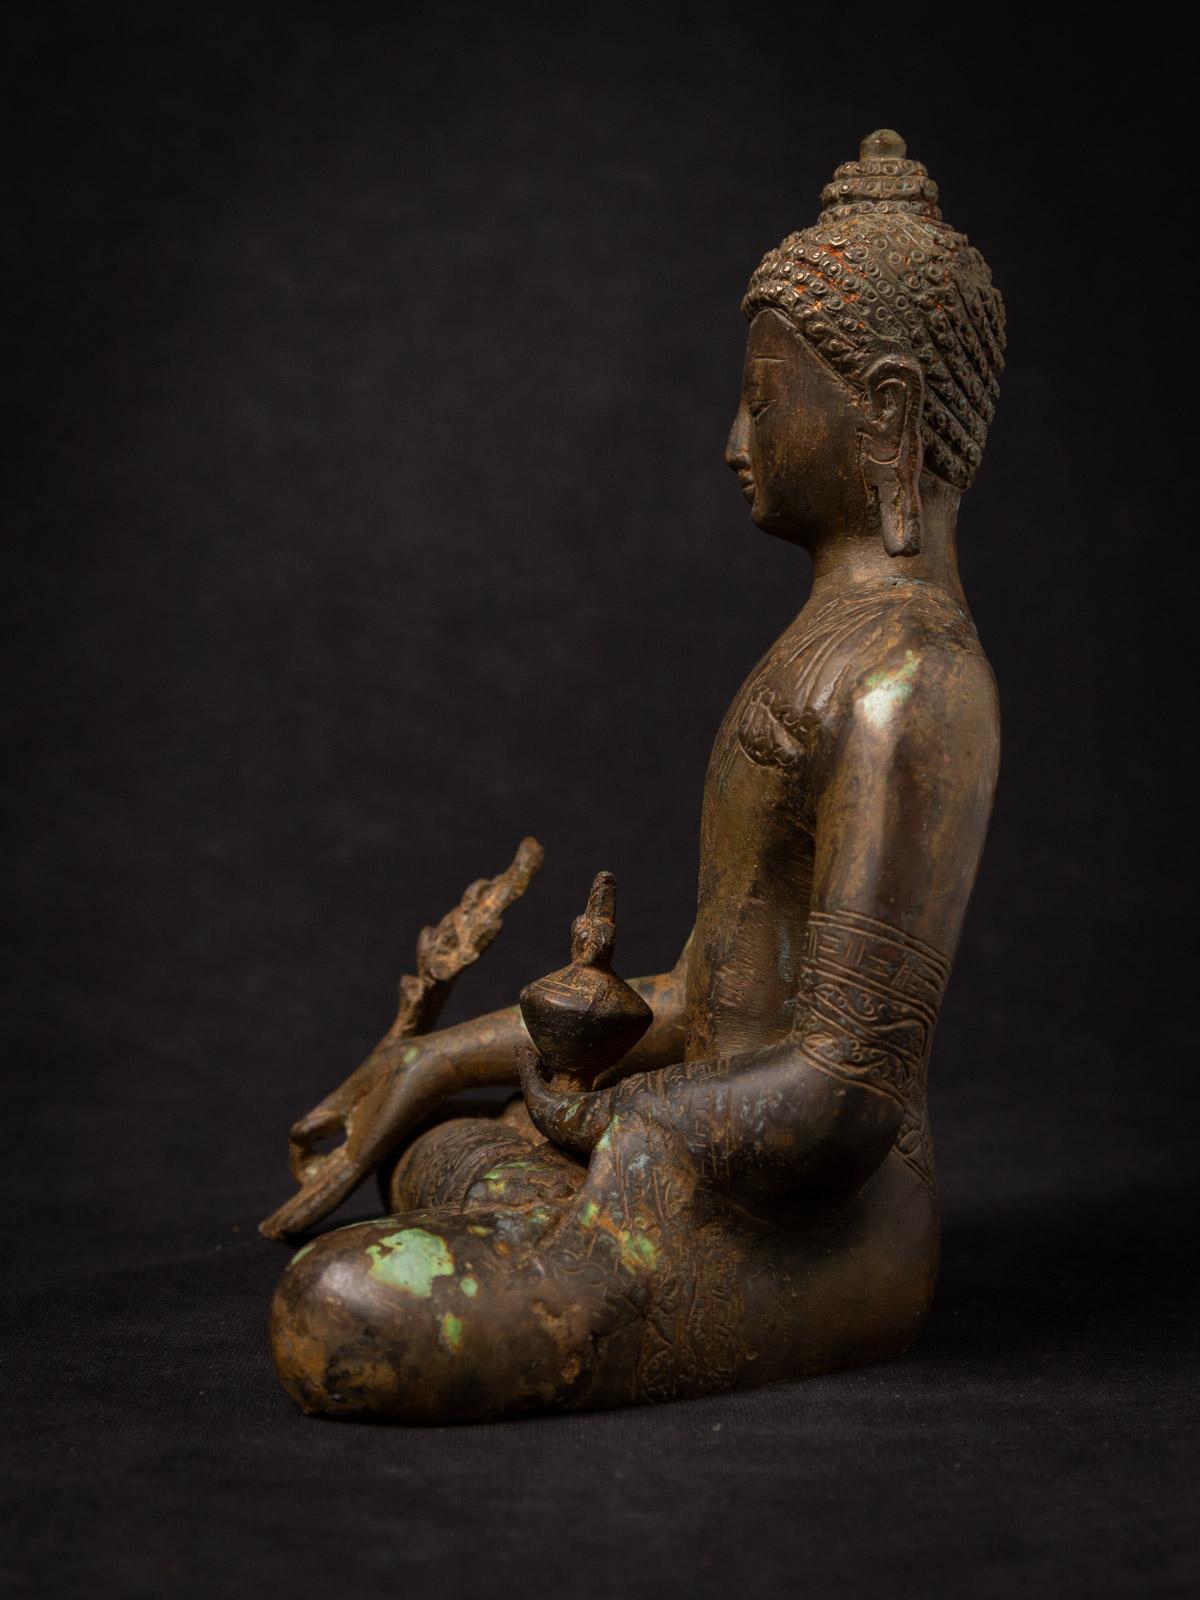 This Bronze Nepali Medicine Buddha statue is a true masterpiece of craftsmanship and spirituality. Standing at a majestic 21,8 cm in height, with dimensions of 16,8 cm in width and 13,1 cm in depth, it is a substantial representation of the Medicine